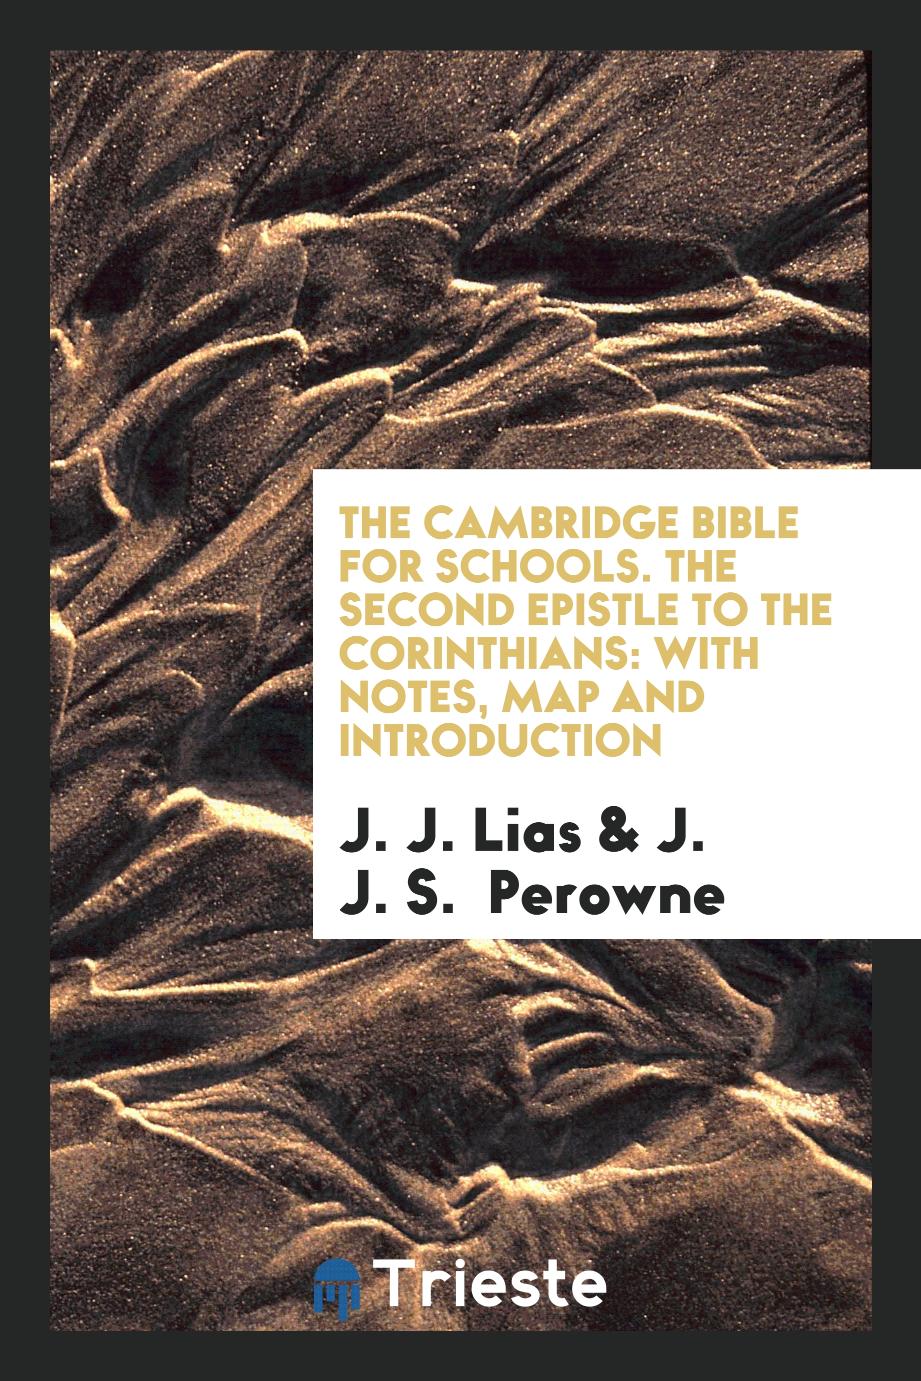 The Cambridge Bible for Schools. The Second Epistle to the Corinthians: With Notes, Map and Introduction